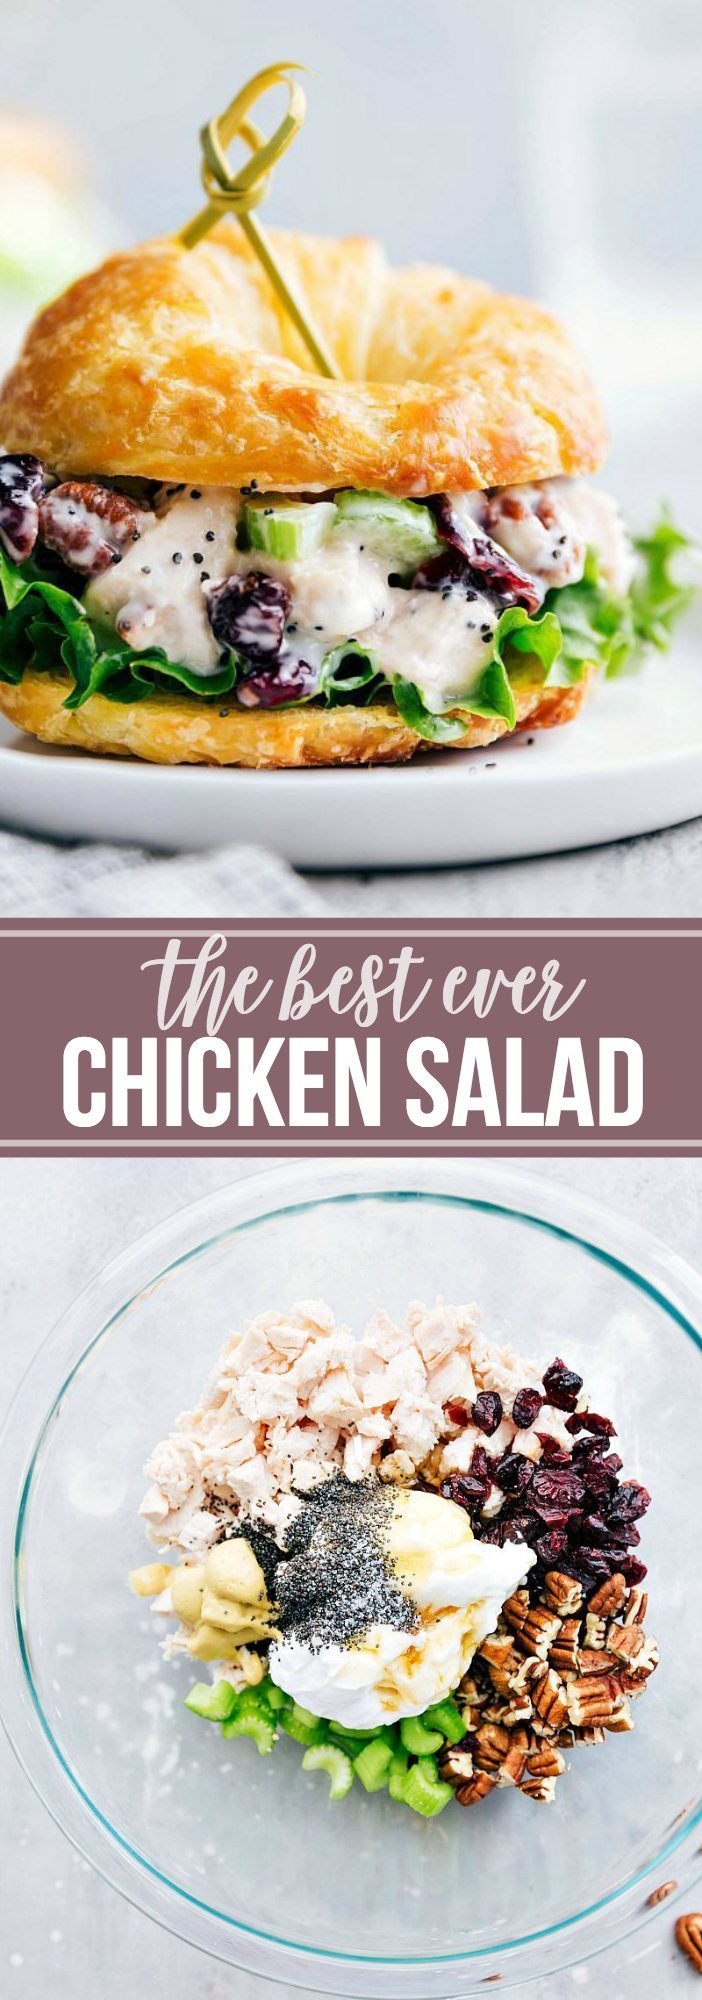 The BEST EVER chicken salad sandwiches! Perfect for the holidays to serve as an appetizer! | chelseasmessyapron.com | #chicken #salad #sandwiches #appetizer #lunch #sandwich #holiday #entertaining #fingerfoods #finger #food #easy #quick #poppyseed #cranberry #celery #rotisseriechicken